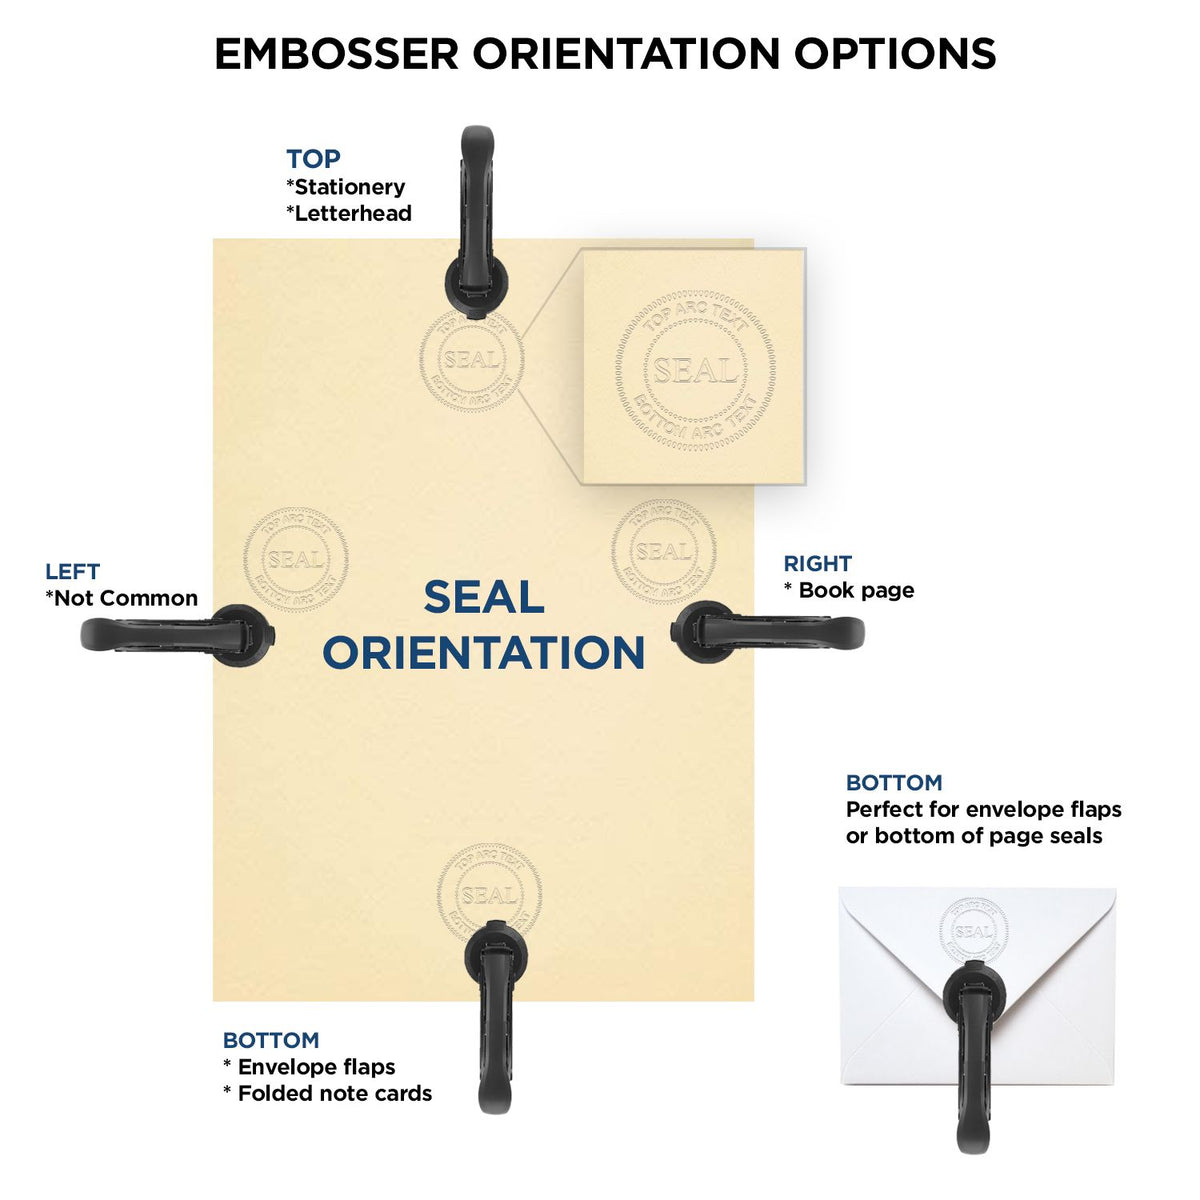 An infographic for the State of Nebraska Extended Long Reach Engineer Seal showing embosser orientation, this is showing examples of a top, bottom, right and left insert.